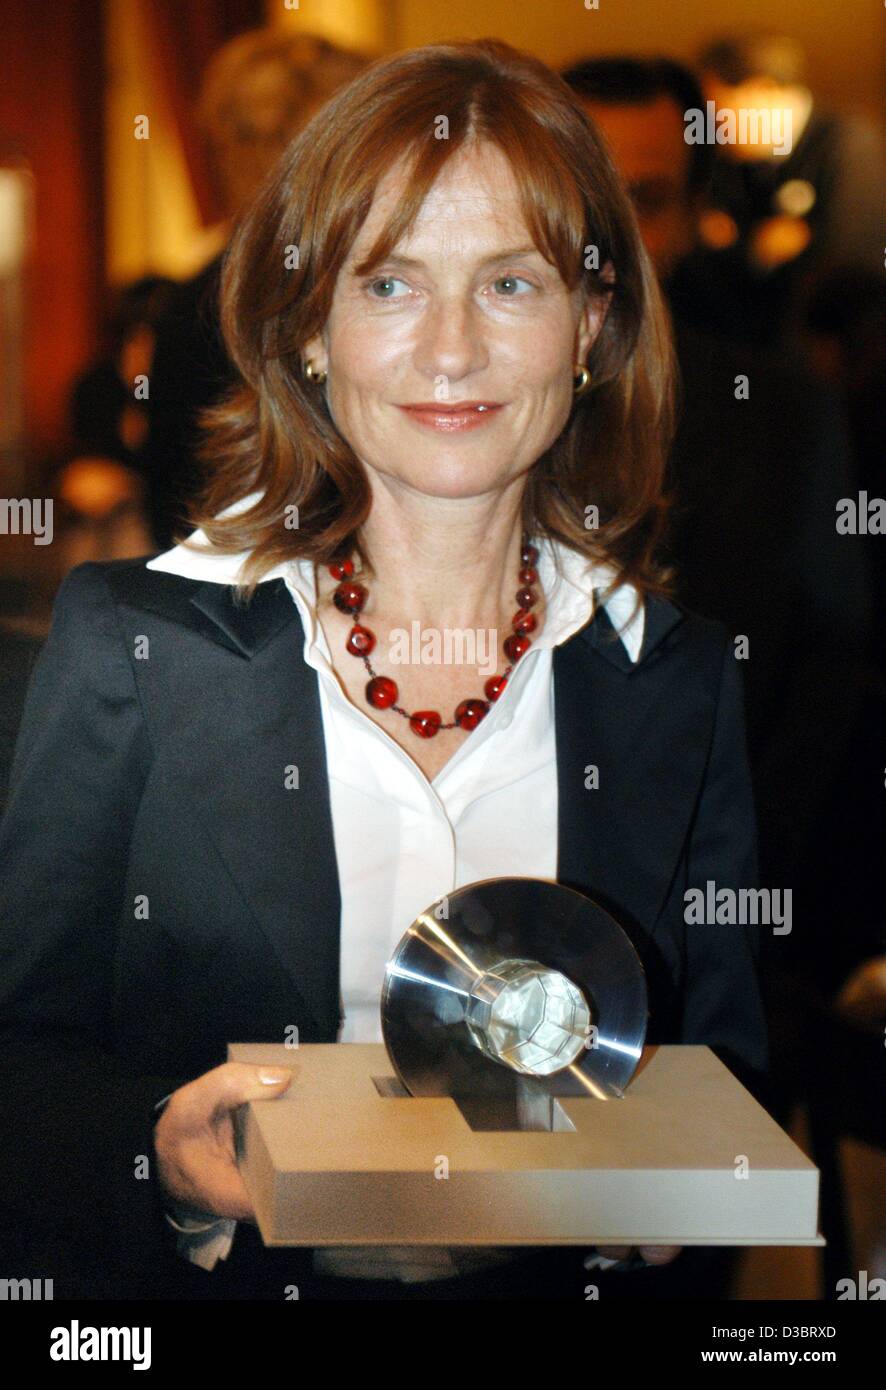 (dpa) - French actress Isabelle Huppert poses with her Douglas Sirk Prize after the award ceremony in Hamburg, 25 September 2003. Isabelle Huppert's films include Ozon's last film '8 Femmes' (8 women) and has a productive collaboration with Claude Chabrol, who cast her in several movies, including V Stock Photo